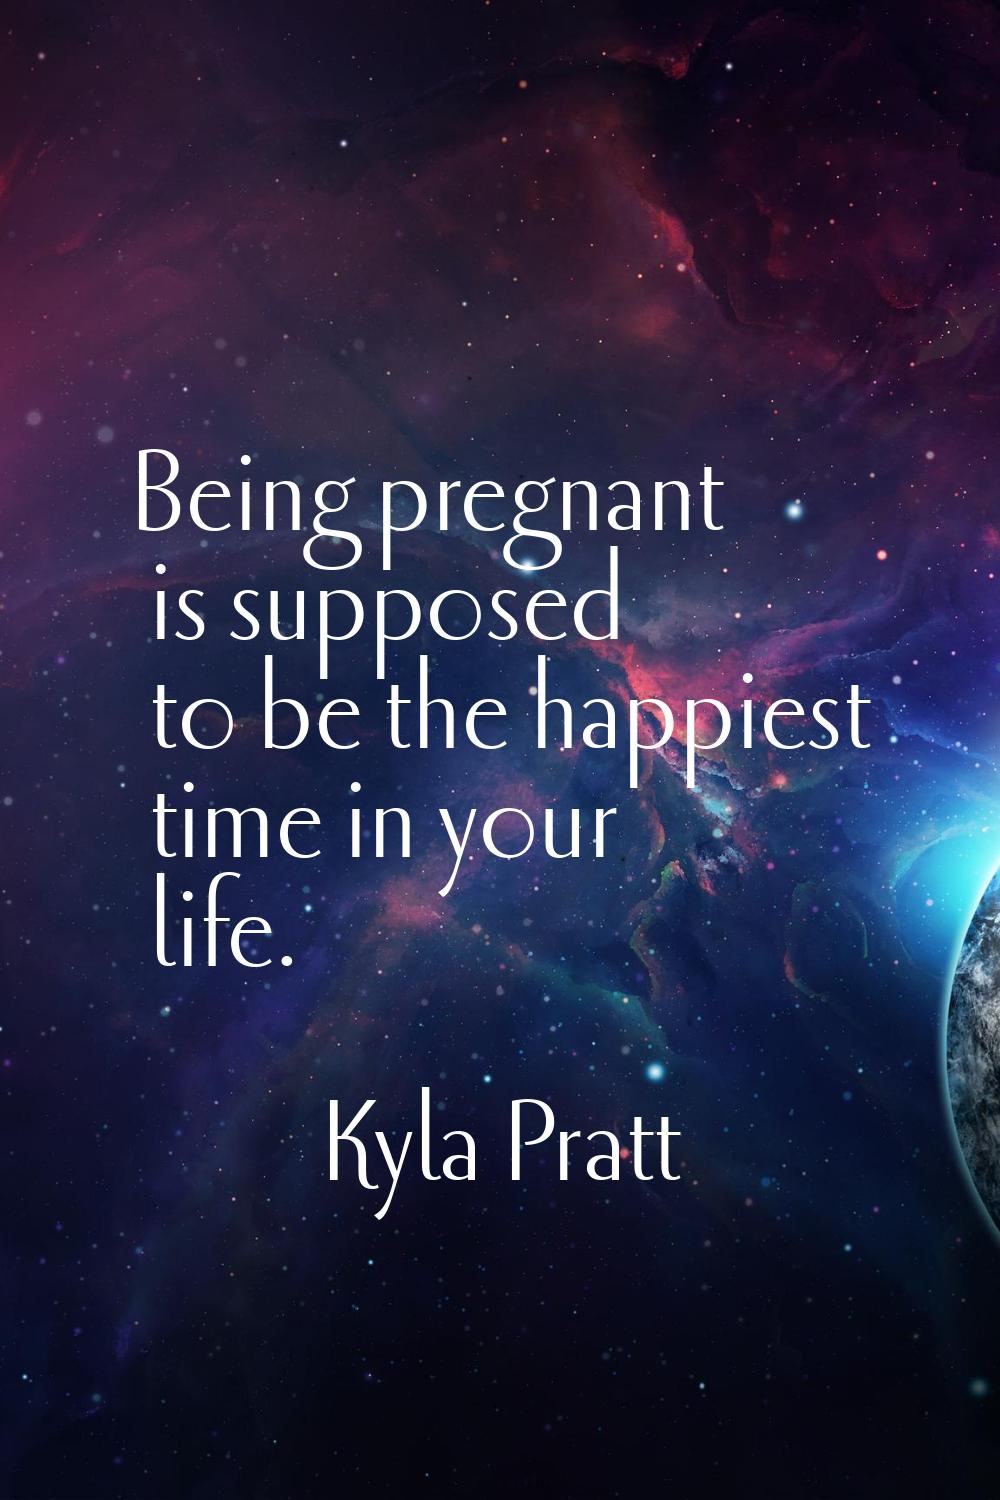 Being pregnant is supposed to be the happiest time in your life.